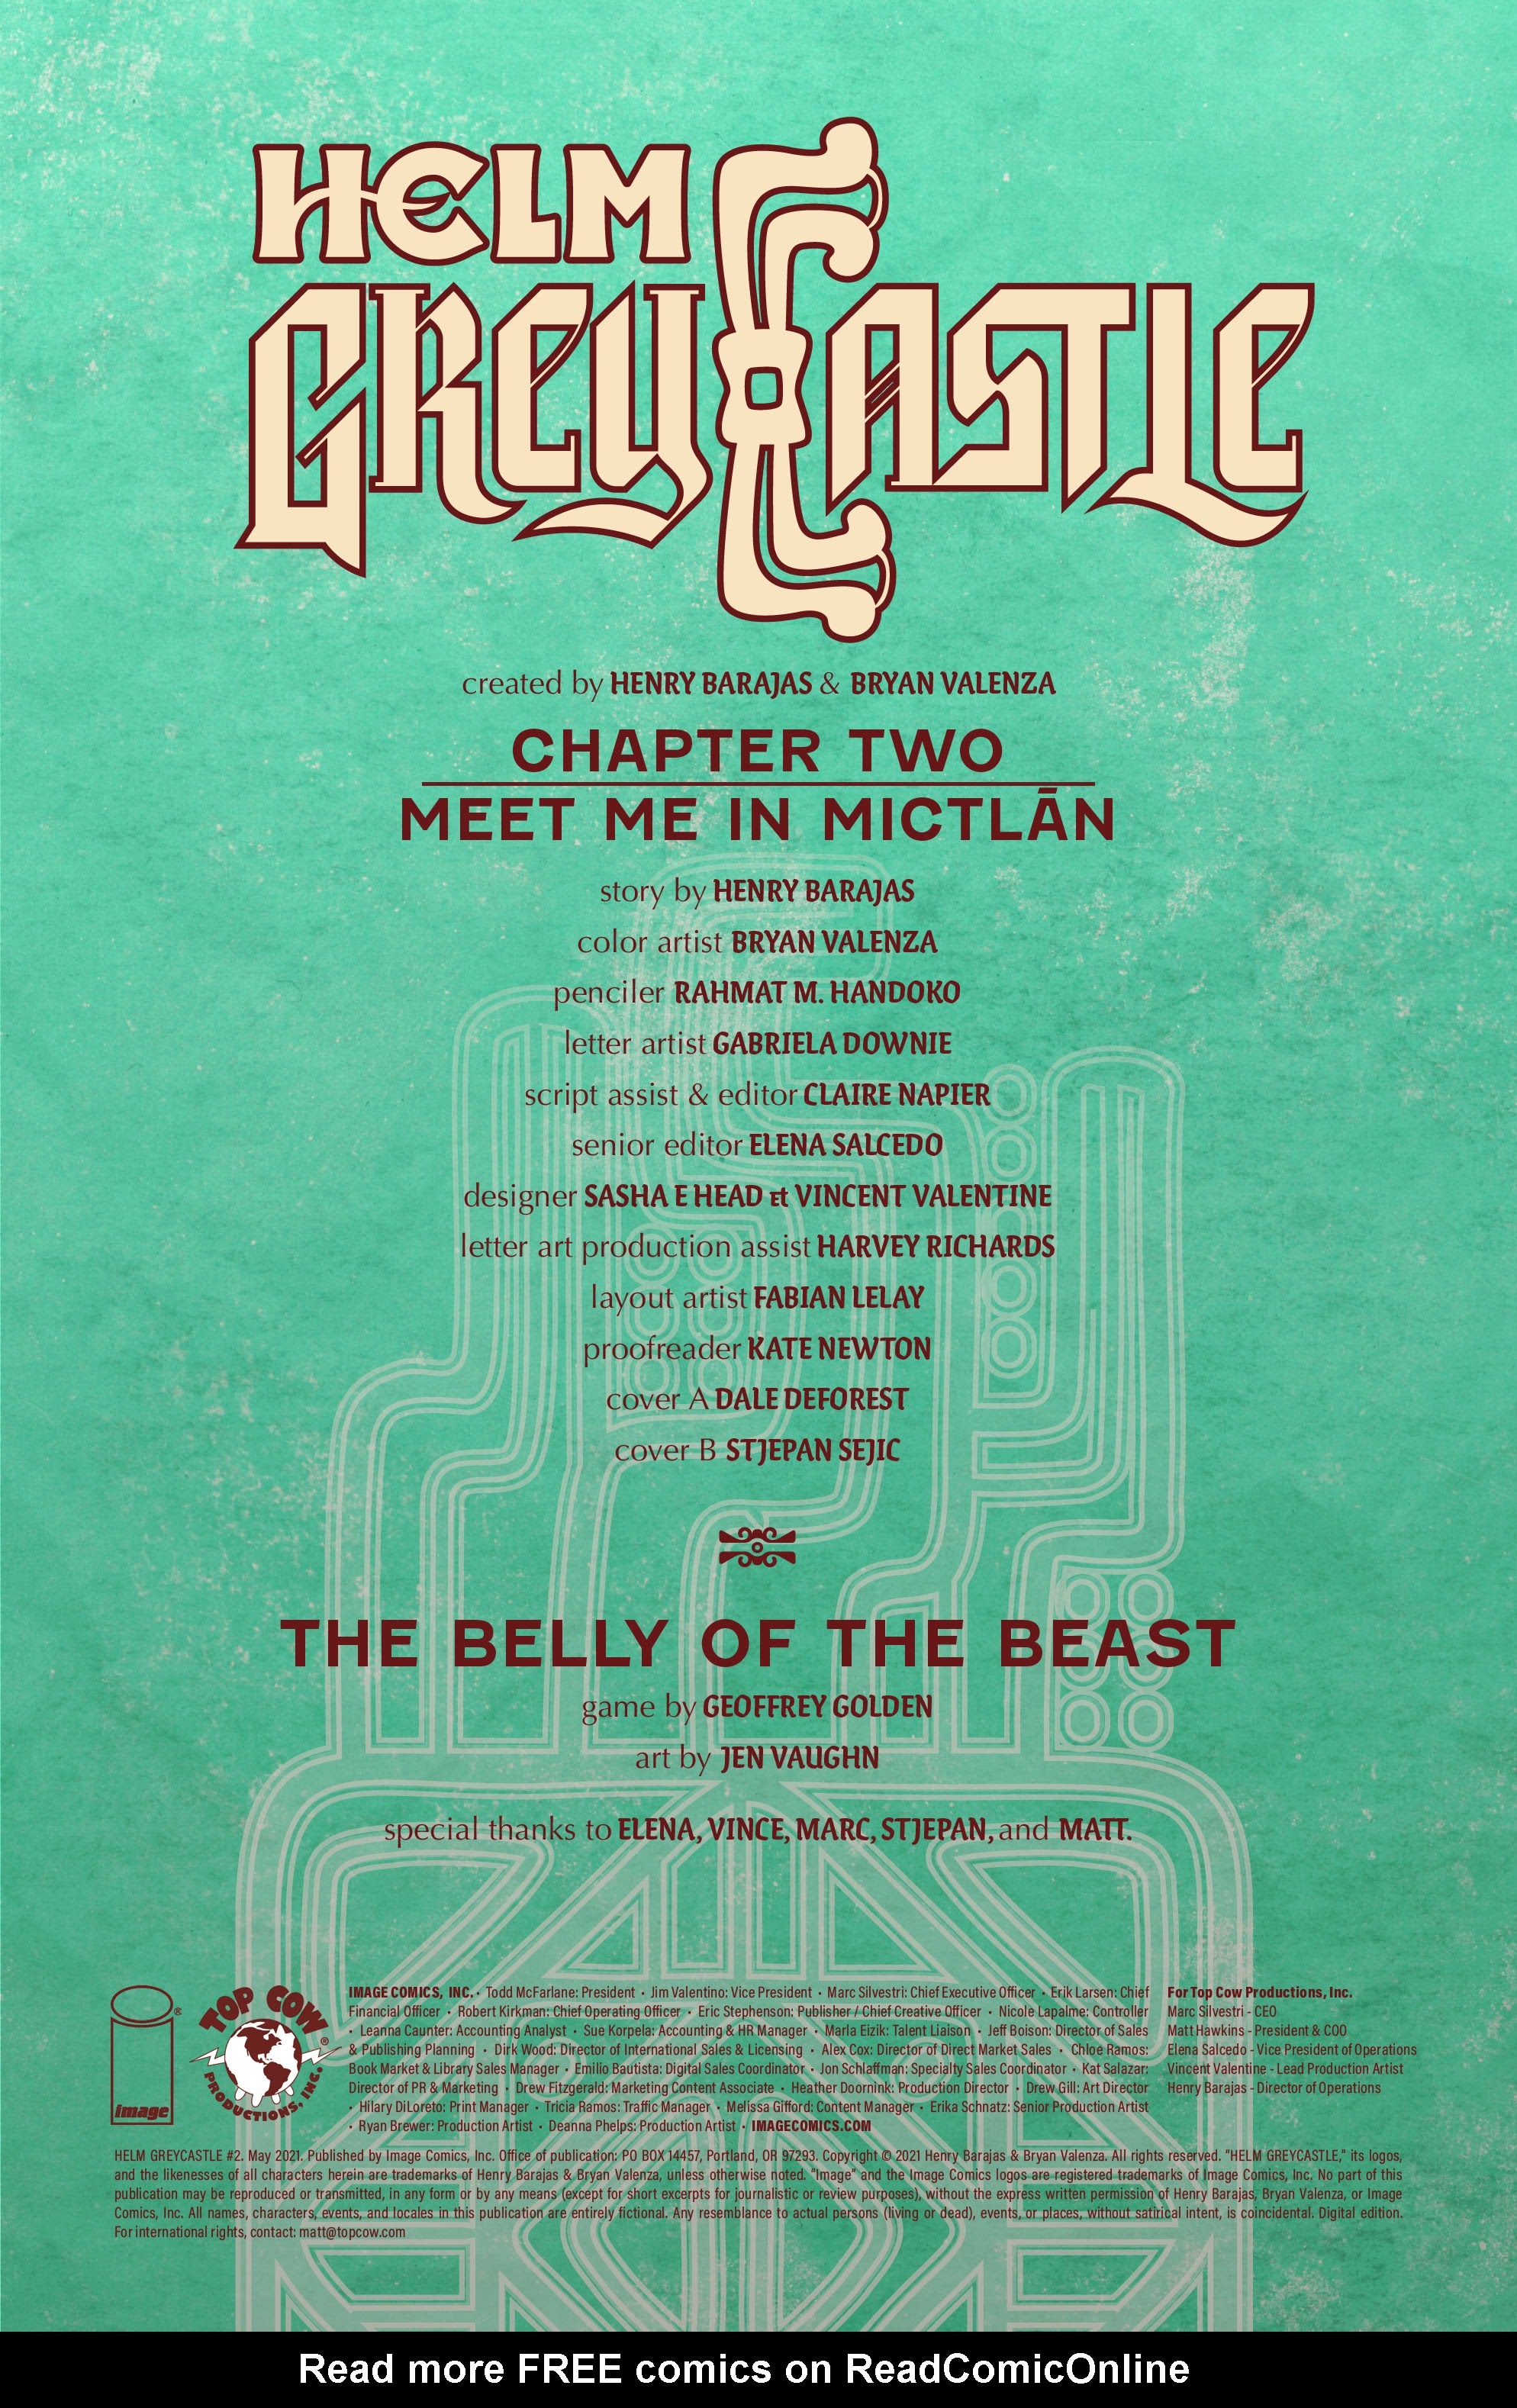 Read online Helm Greycastle comic -  Issue #2 - 3